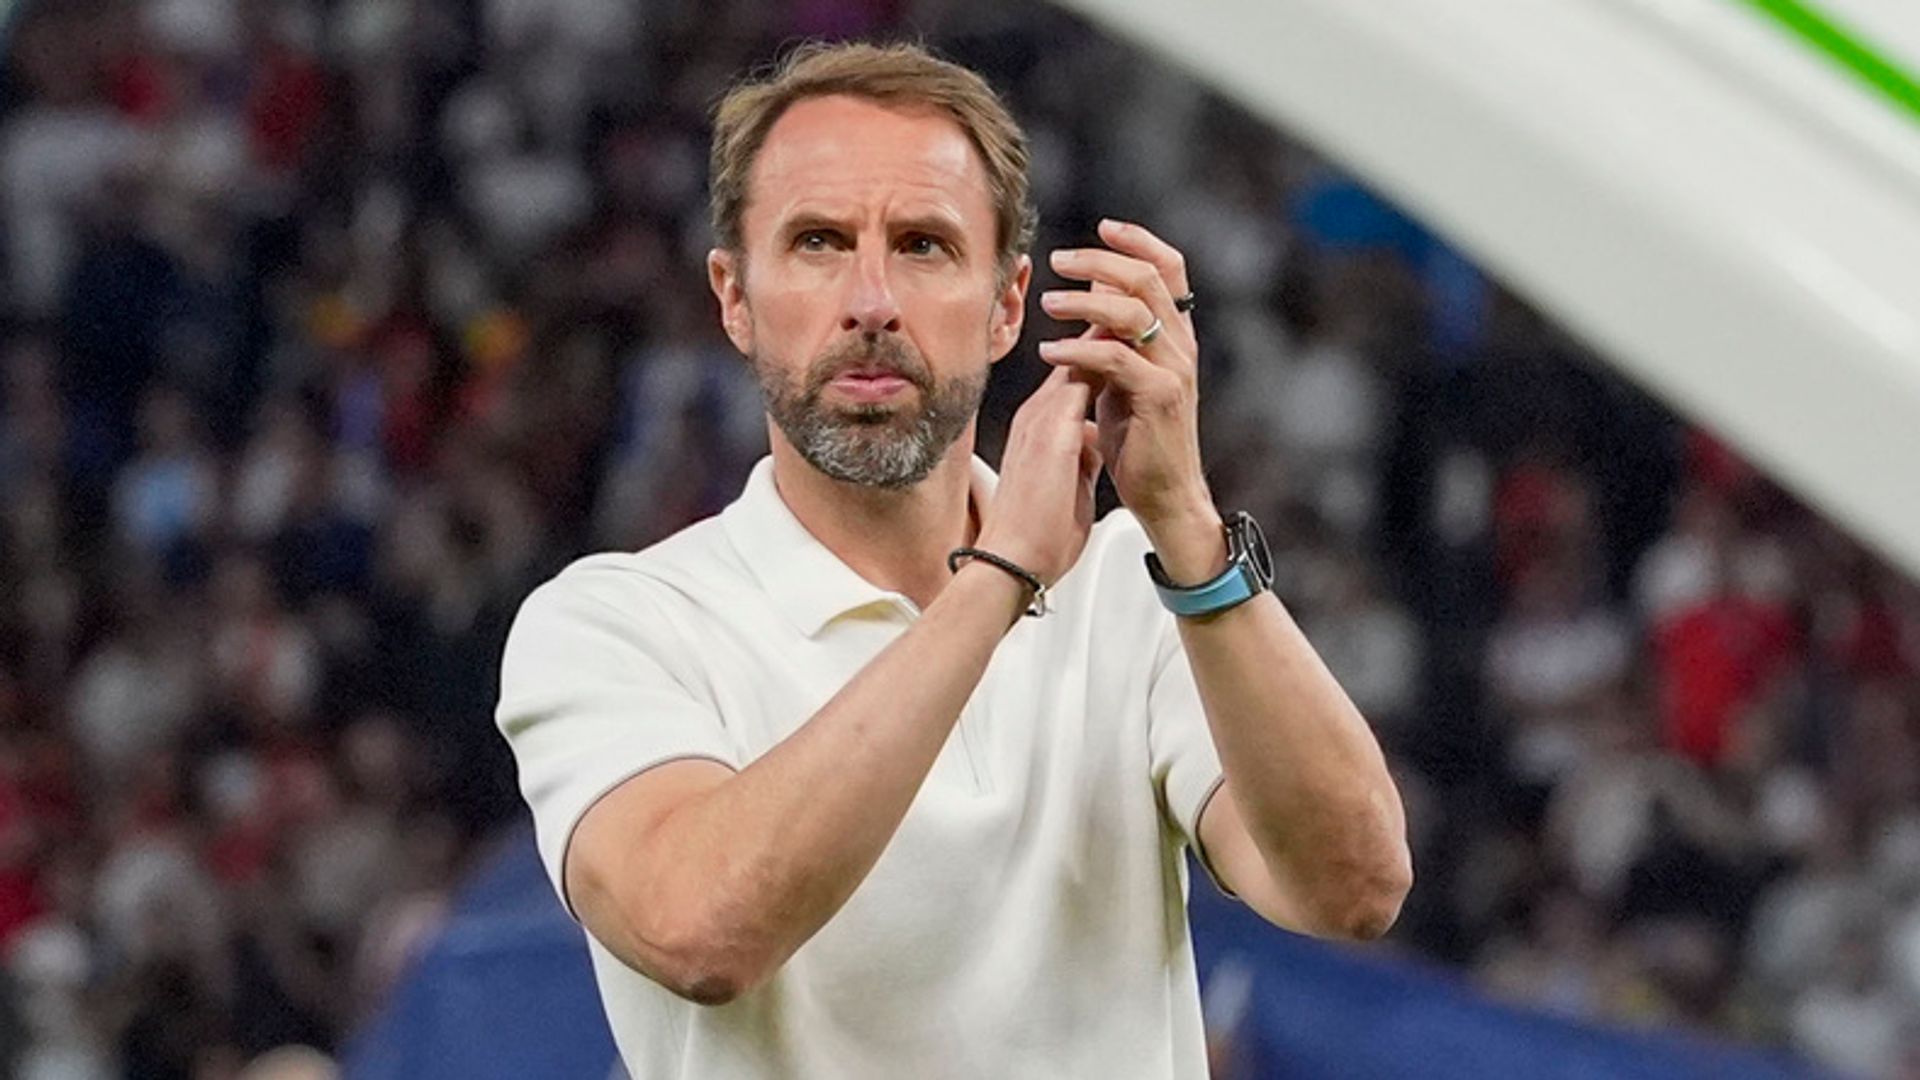 FA plans to interview diverse candidates to replace Southgate